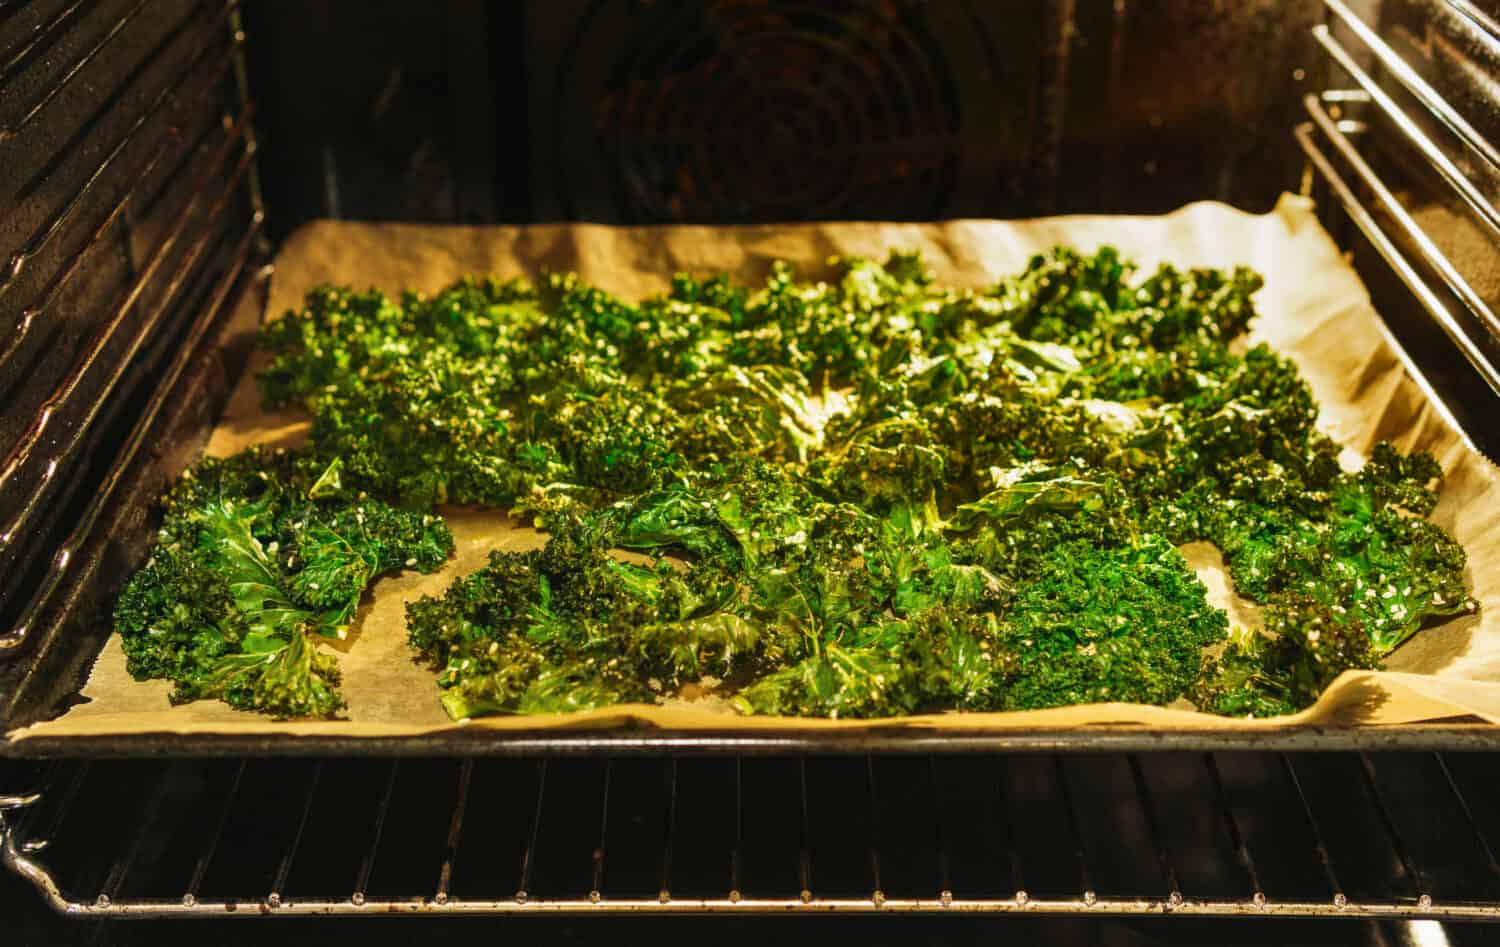 Freshly made crispy kale chips on a baking tray and baking paper in a lit up oven with open oven door - angled view, horizontal landscape format